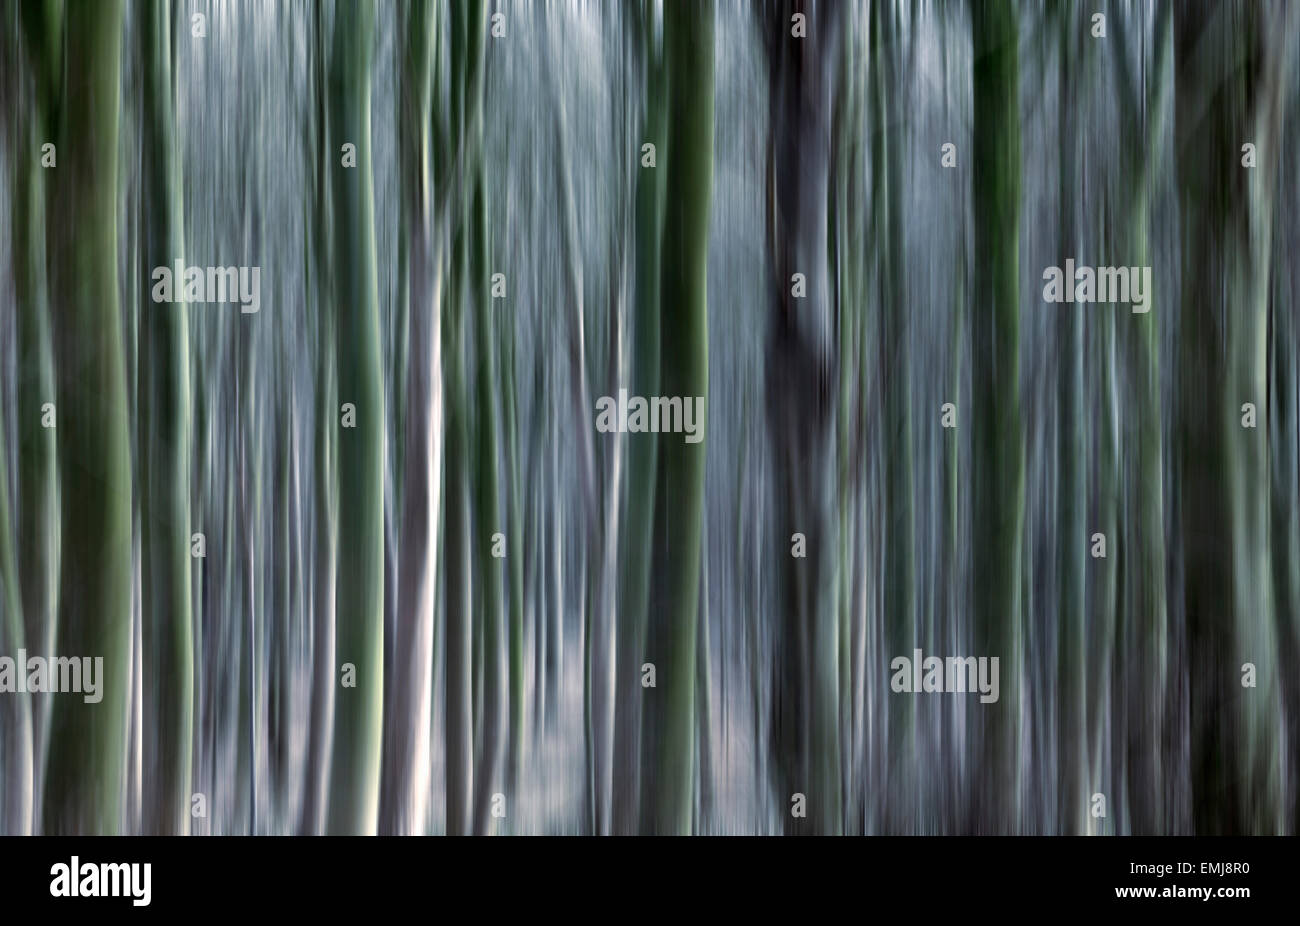 Tree trunks with added motion blur. Stock Photo